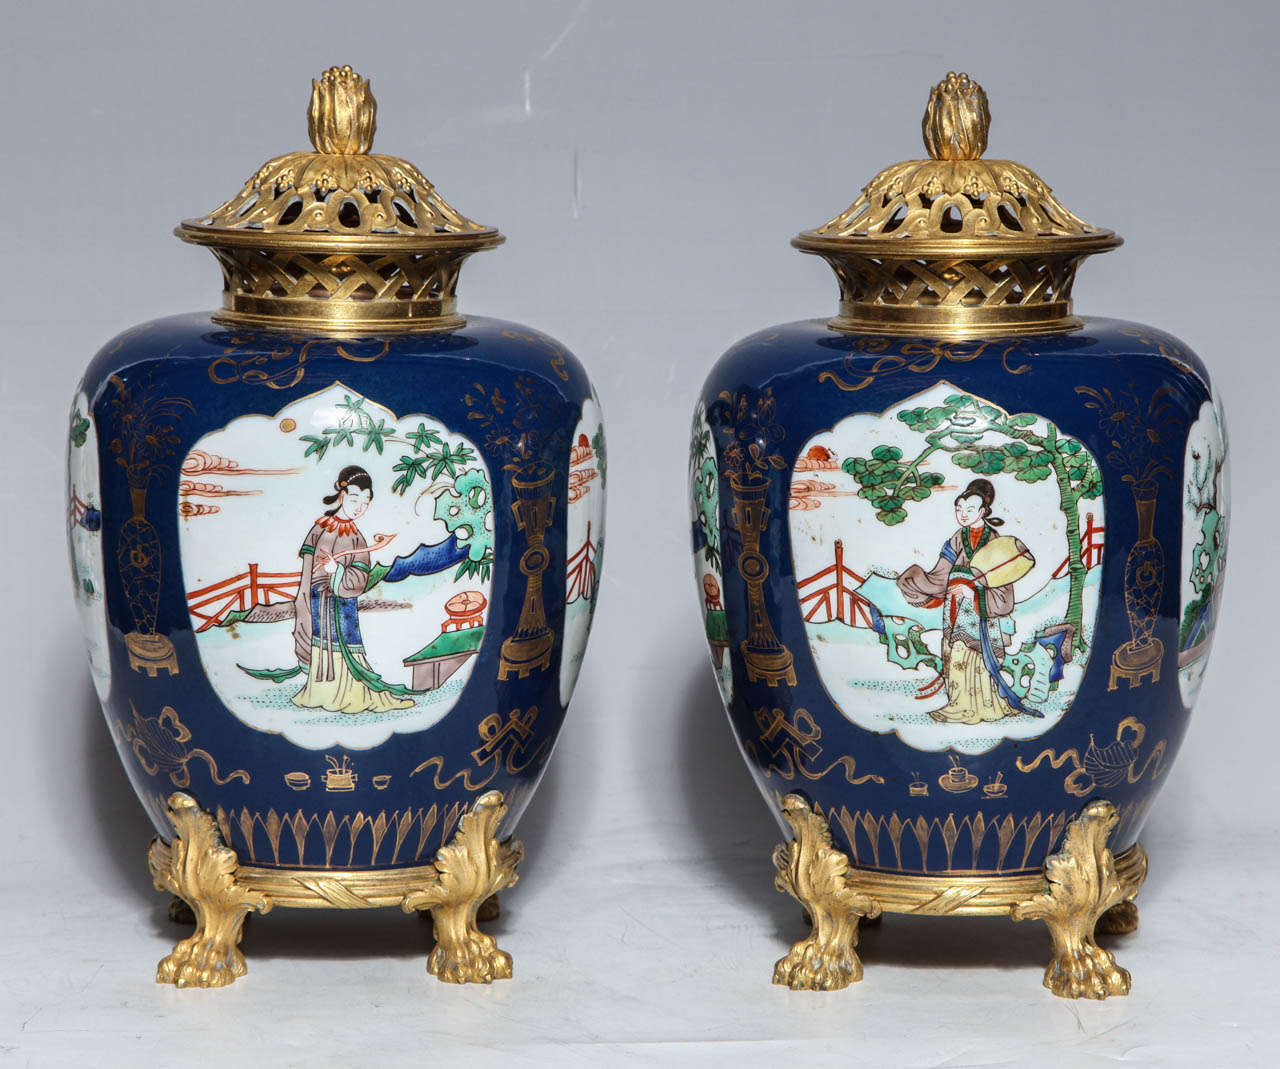 A Pair of Late 18th/Early 19th Century Mazarin Blue Chinese Porcelain Ginger Jars with Fine Quality French Gilt Bronze Mounts. The dark blue ground (named after one of France's most notorious Cardinals) is enlivened by gilt swags and festoons. The